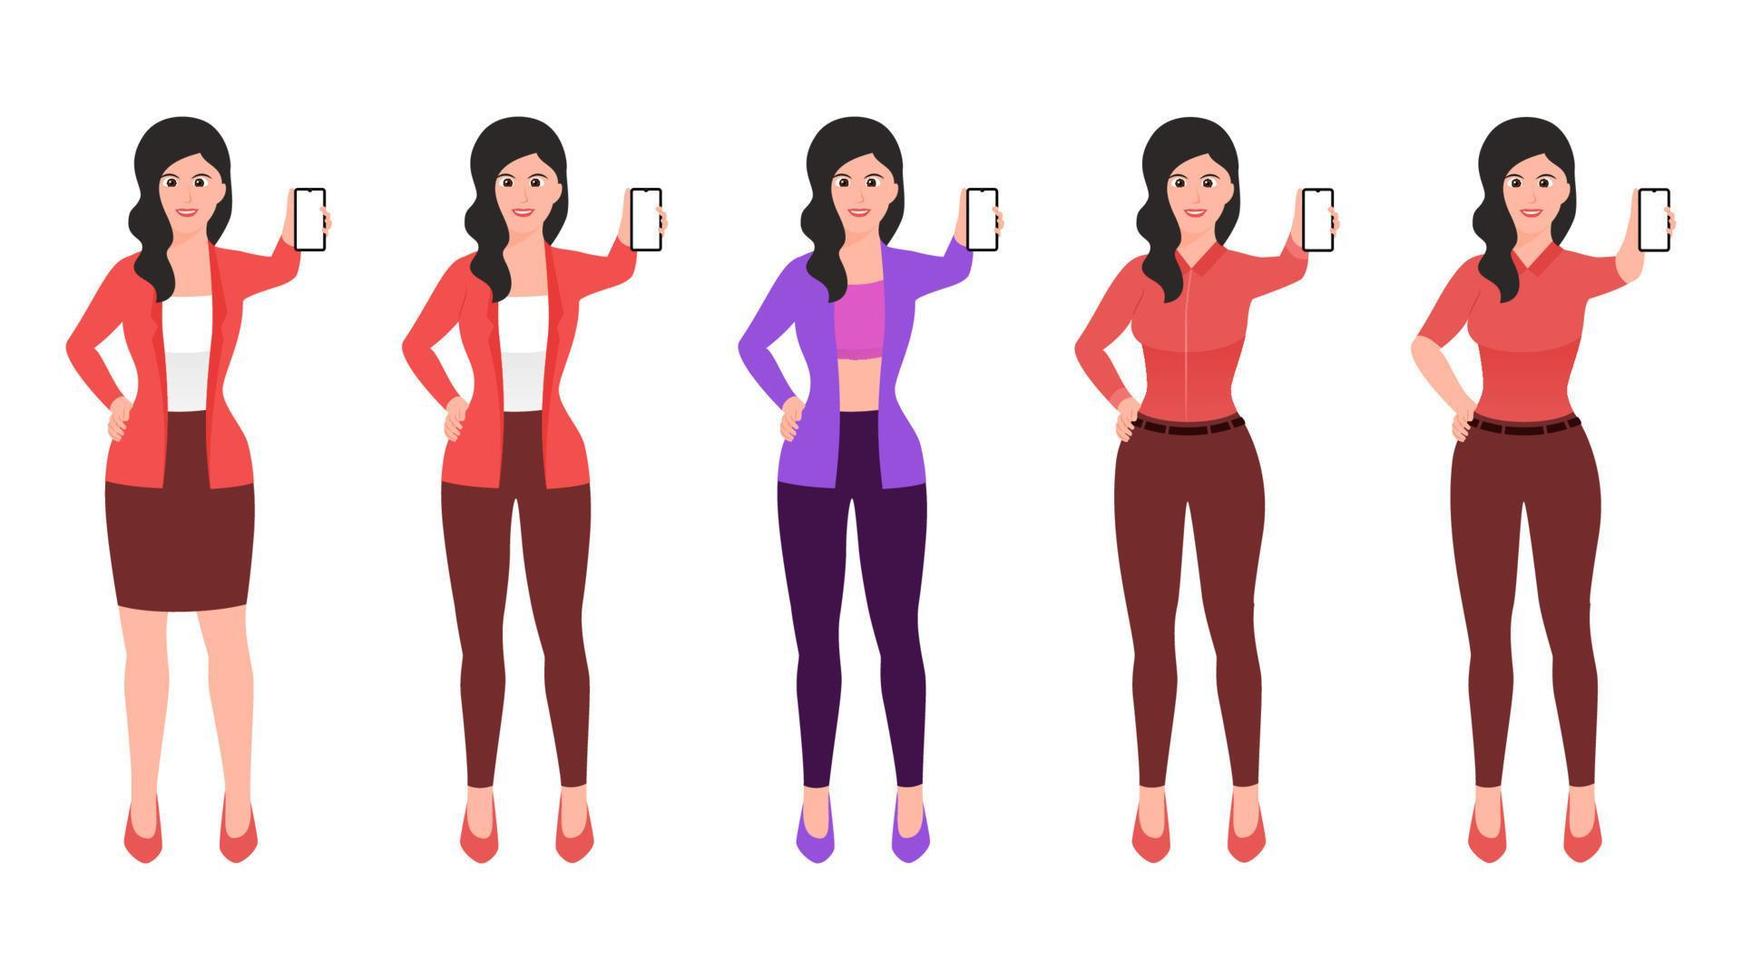 Girl showing mobile screen and other hand on waist, flat character vector illustration set.